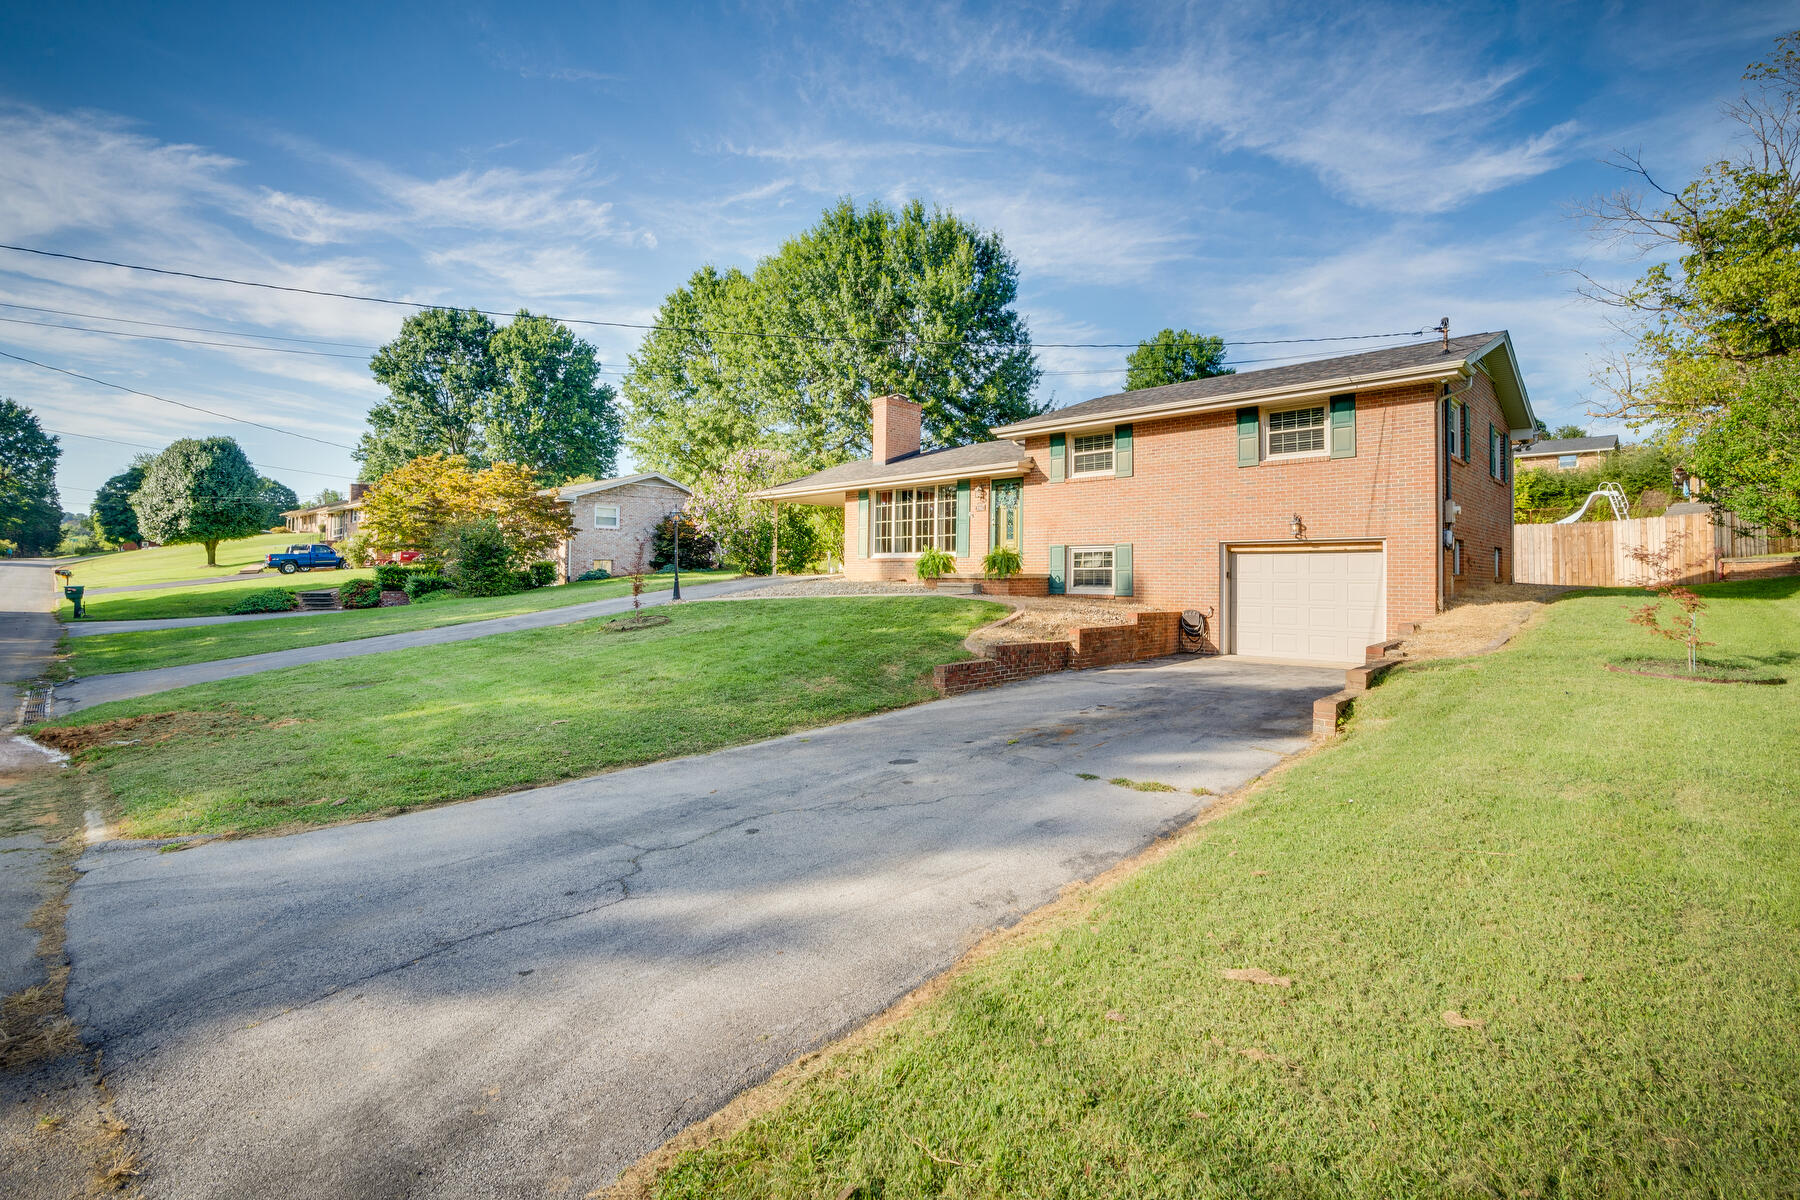 628 West Valley View Circle, Kingsport, TN 37664 Compass